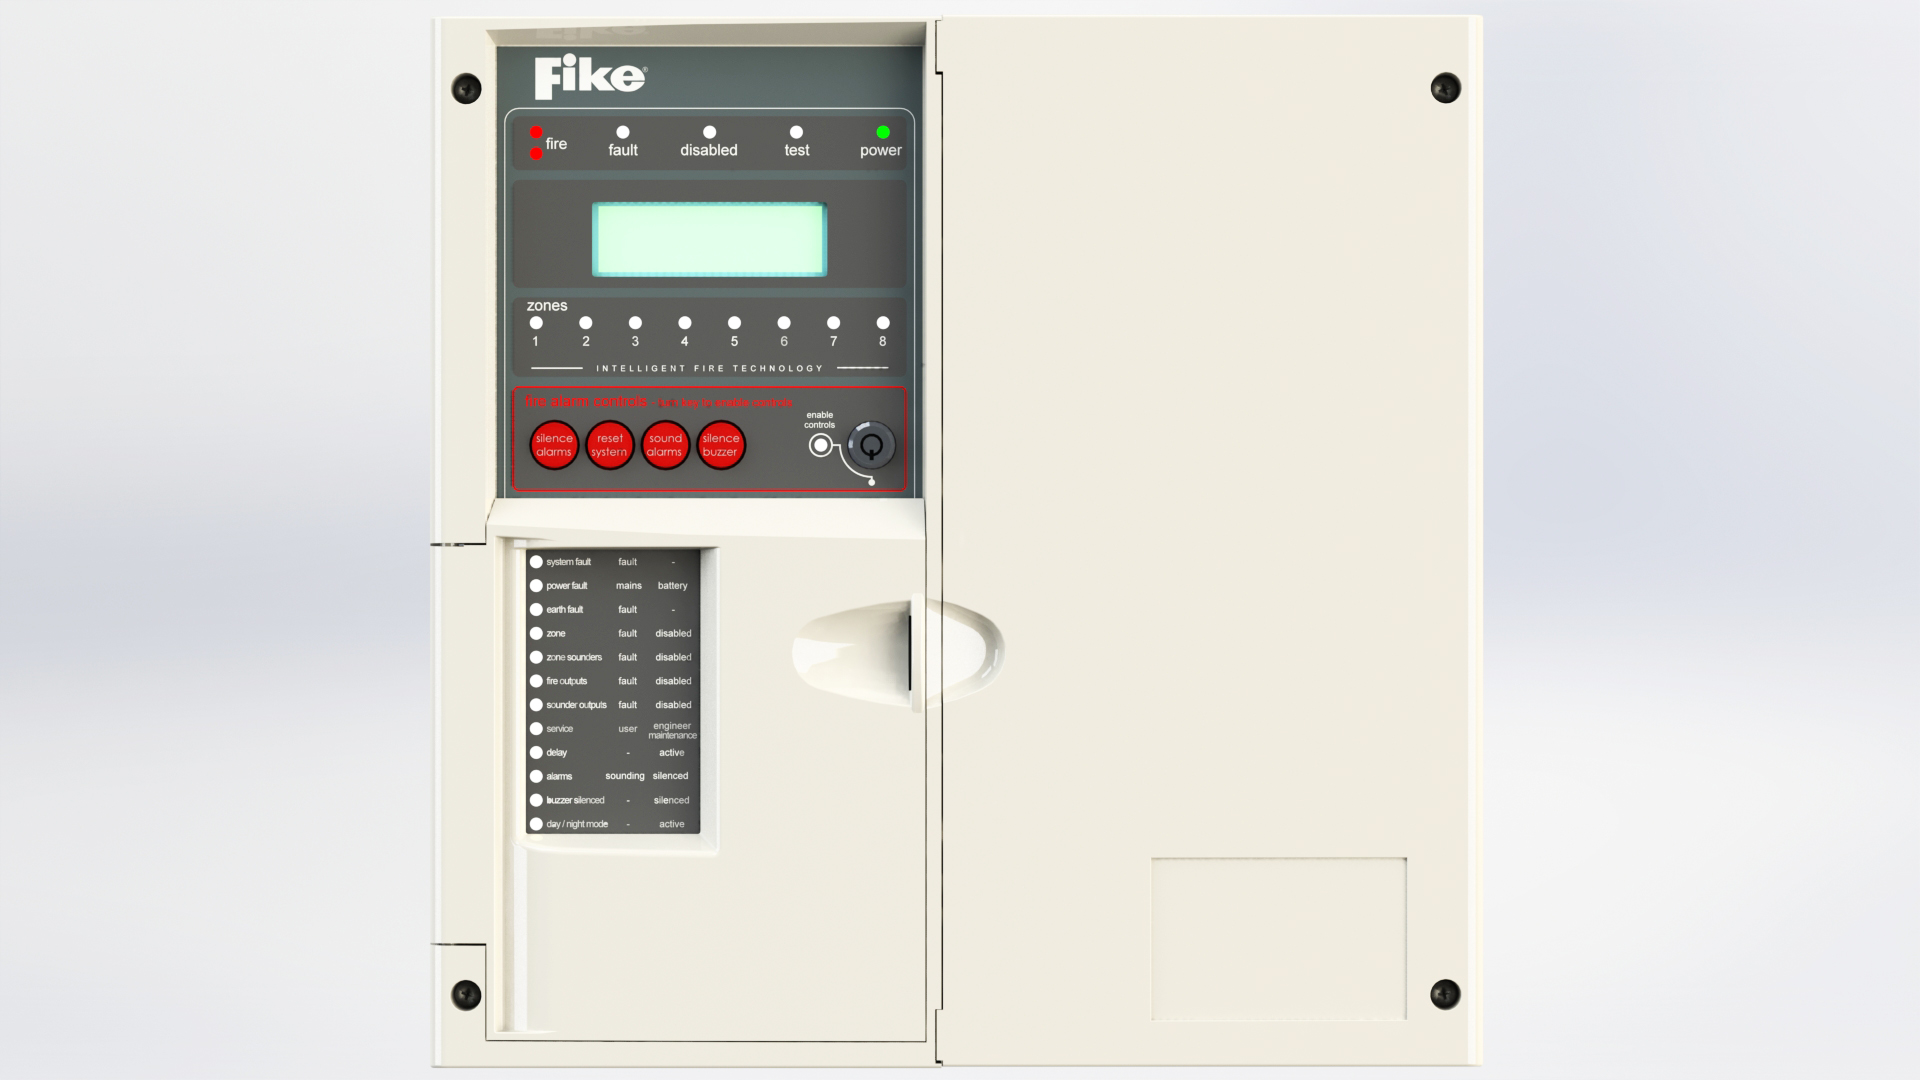 Channel 2 Wire Conventional Fire Detection Systems Fike Sabre Pro Fire Alarm Panel